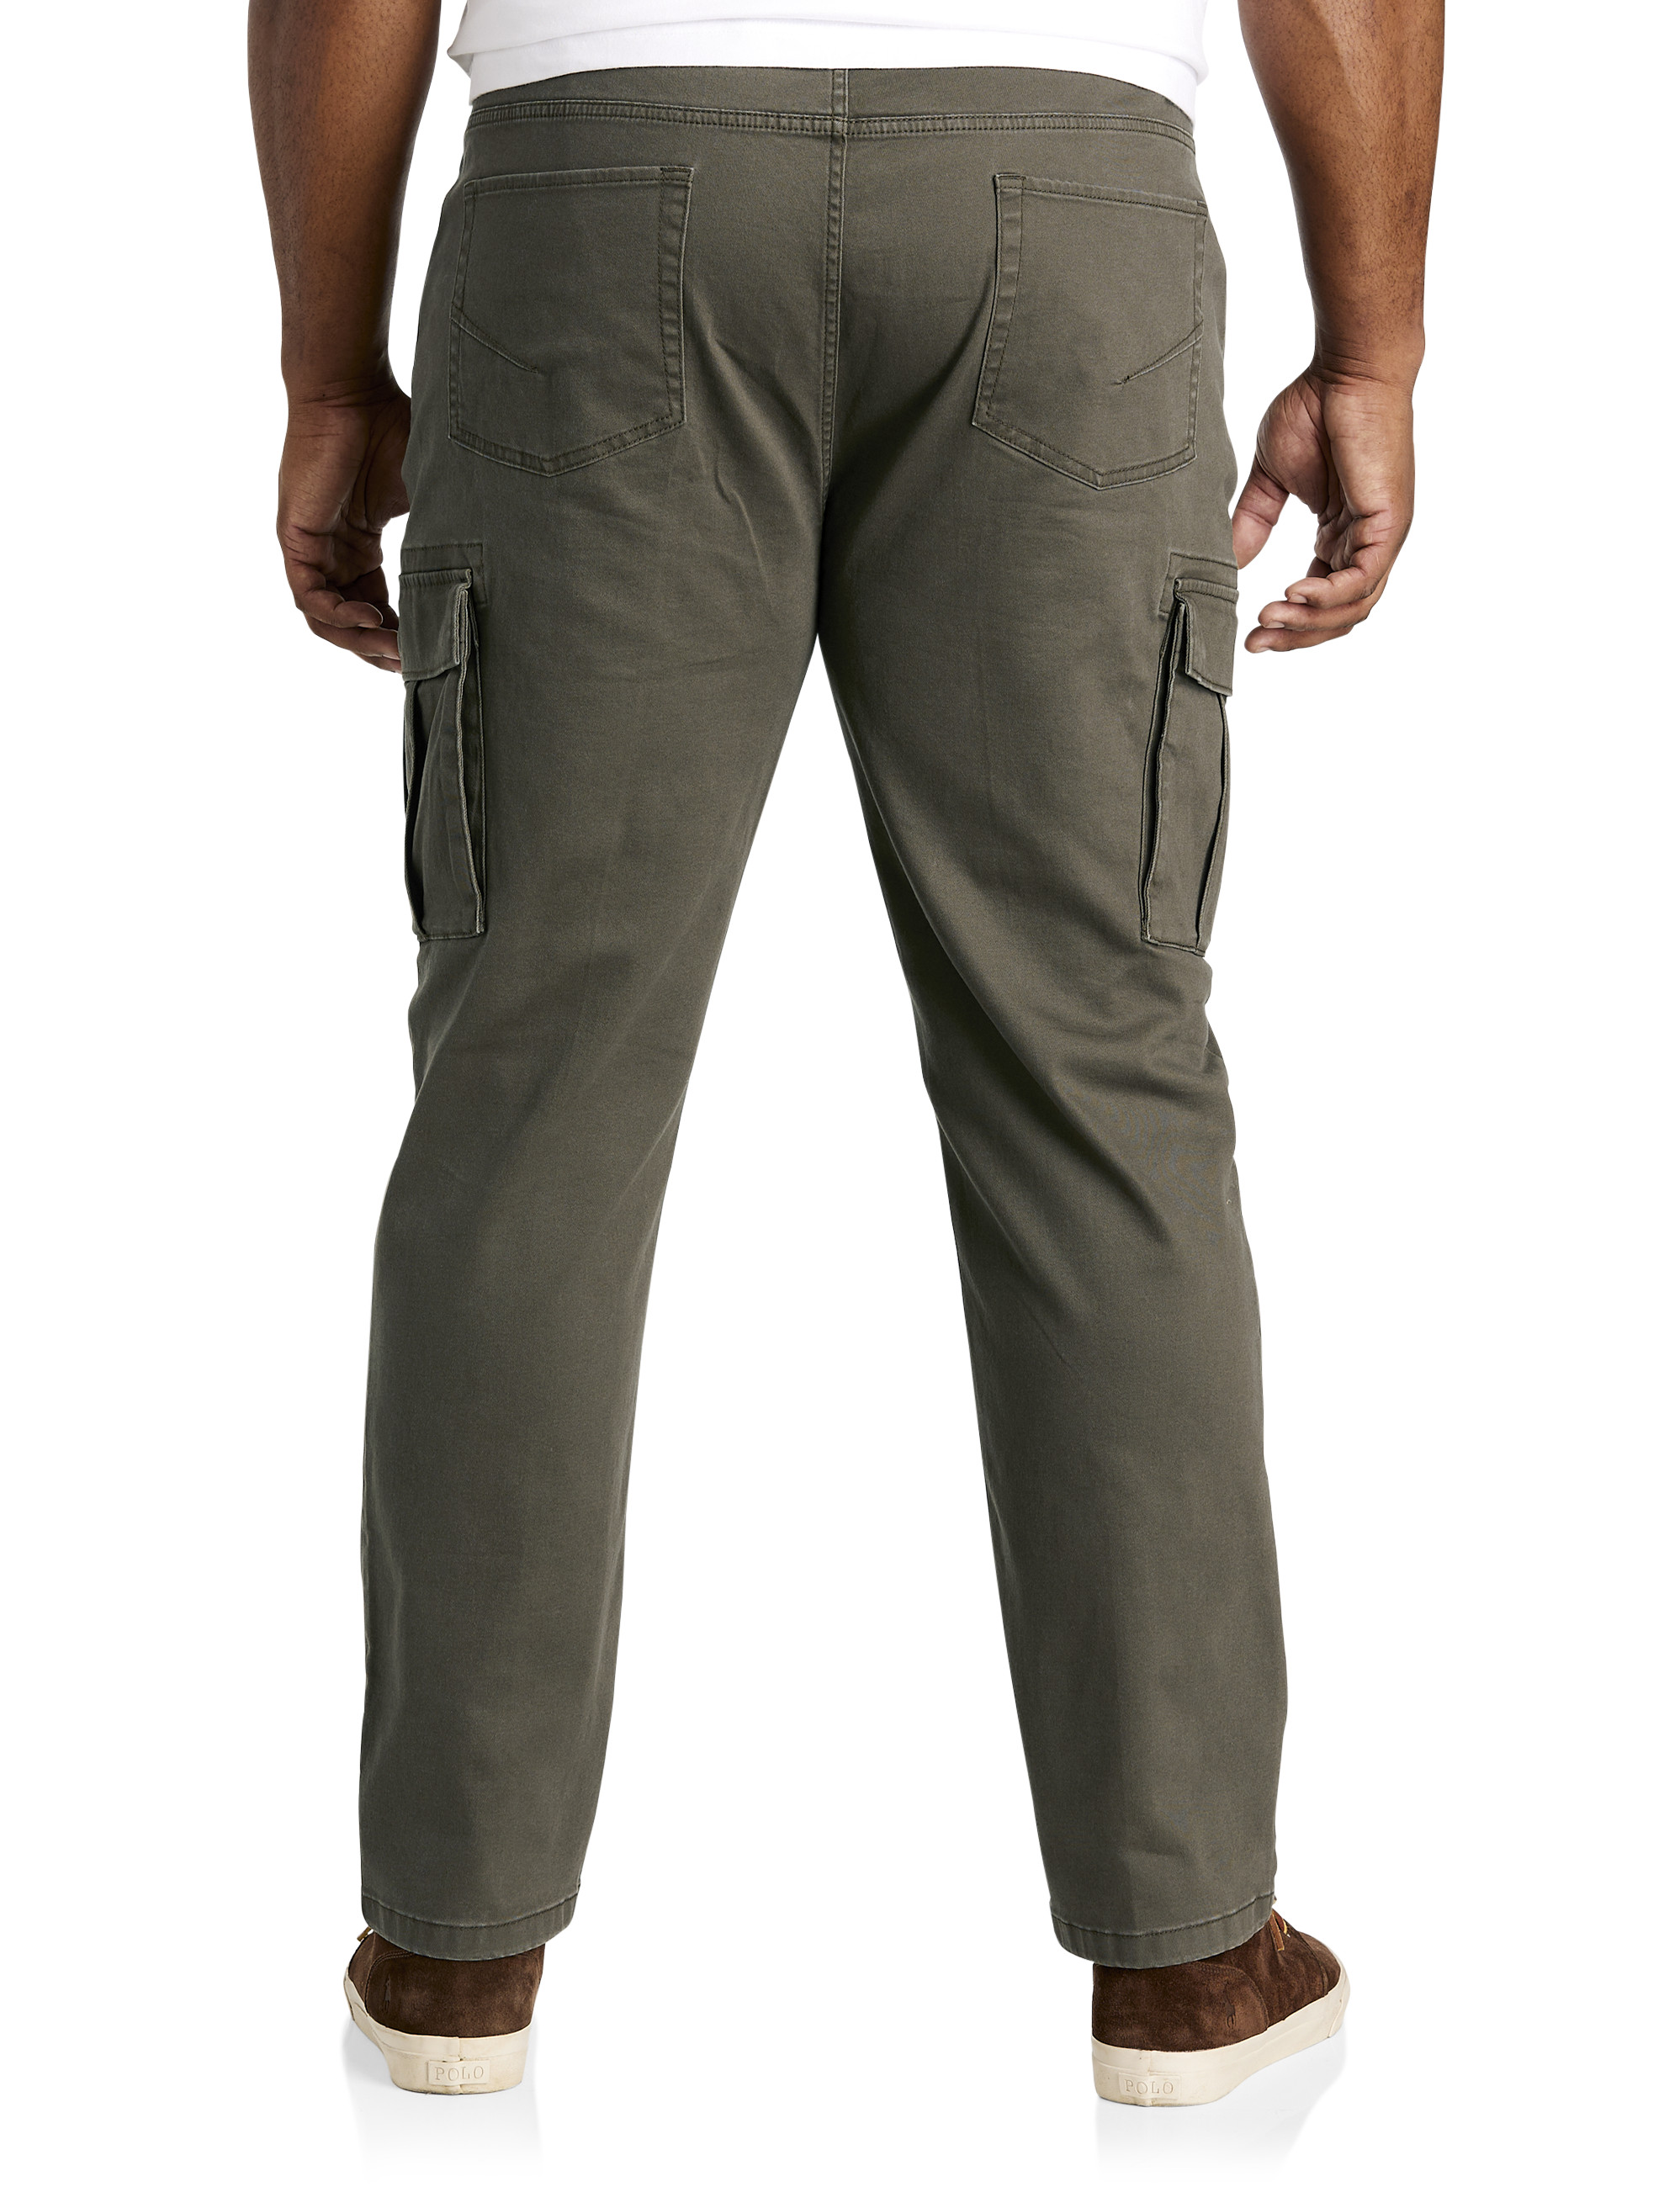 Cargo Pants for Men Straight-Fit Stretch Sweatpants Lightweight